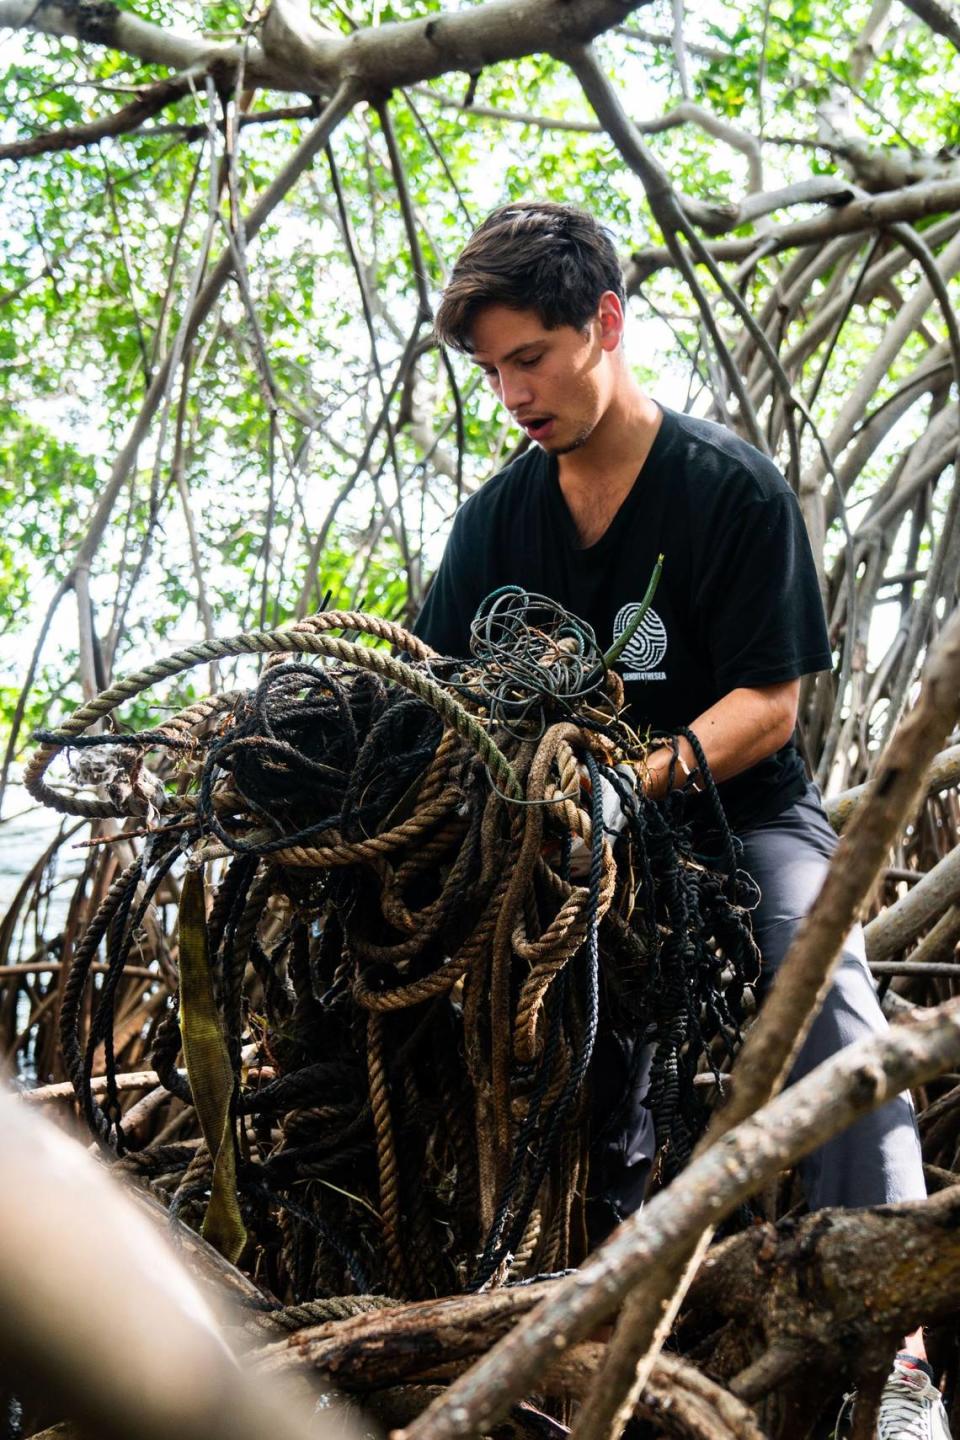 Sendit4thesea Rodolfo Rojas holds a clump of rope and wires that he removed from the mangroves at Kennedy Park in Coconut Grove.